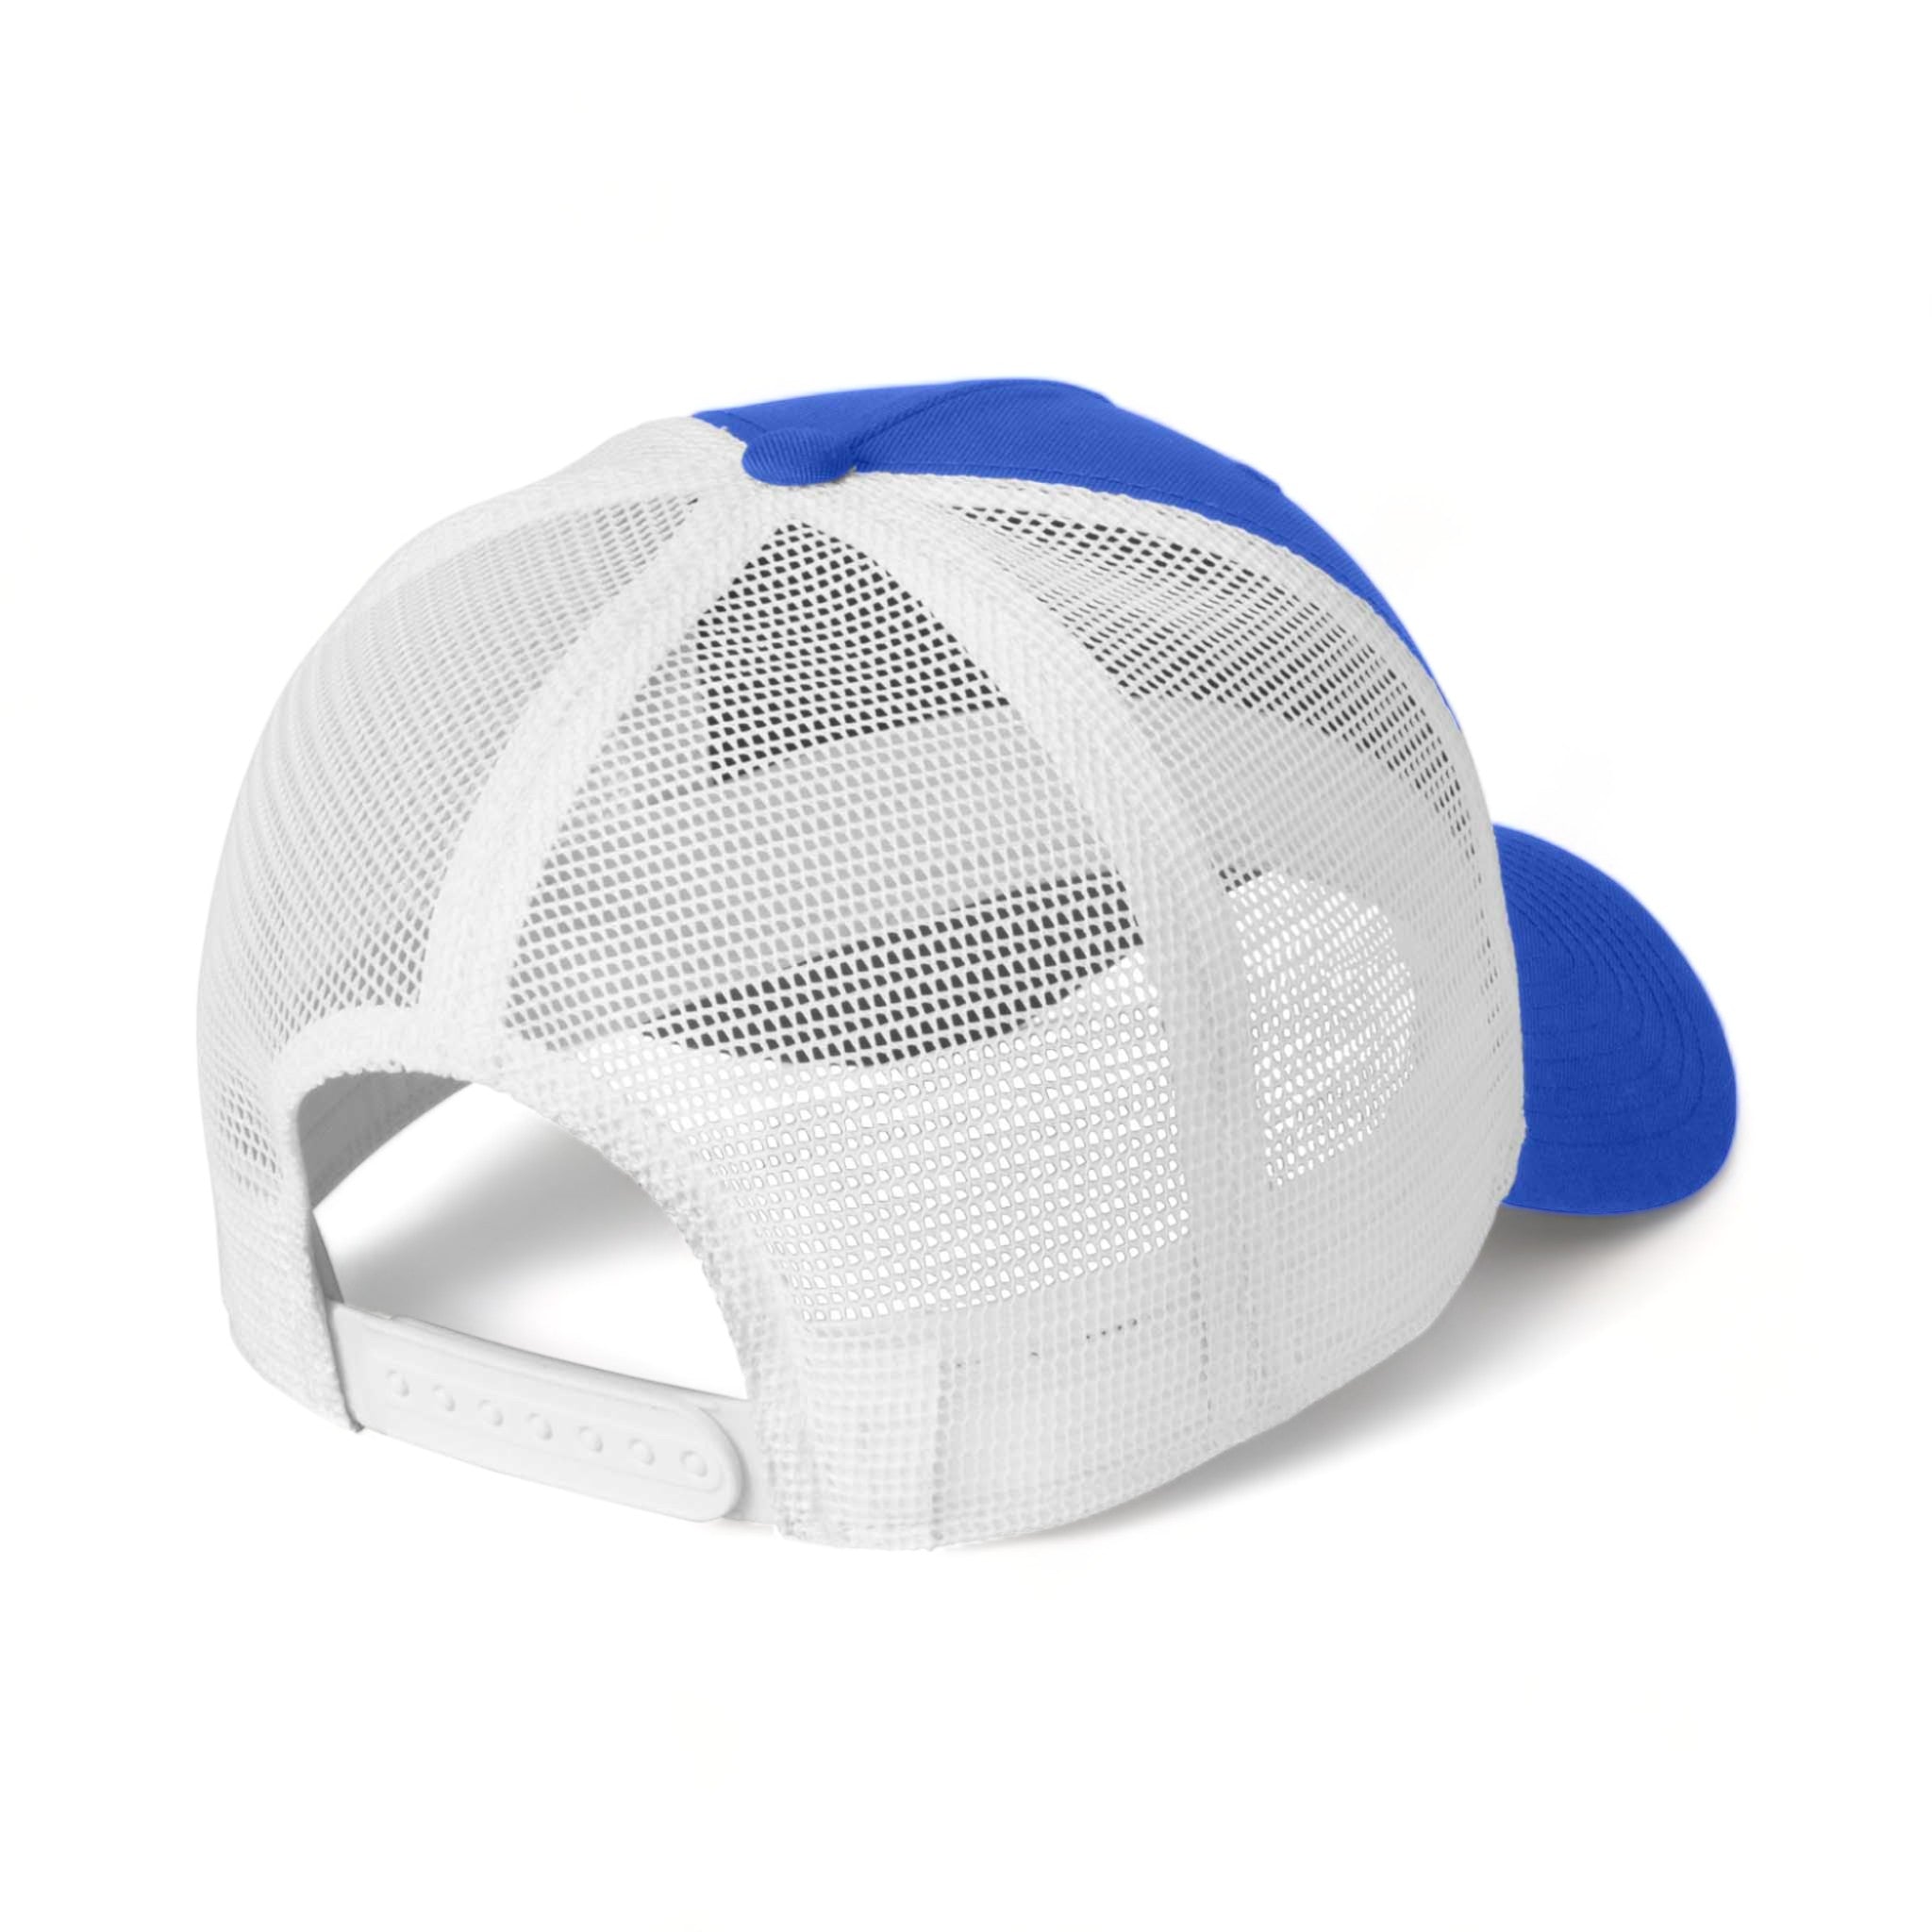 Back view of Nike NKFN9893 custom hat in game royal and white